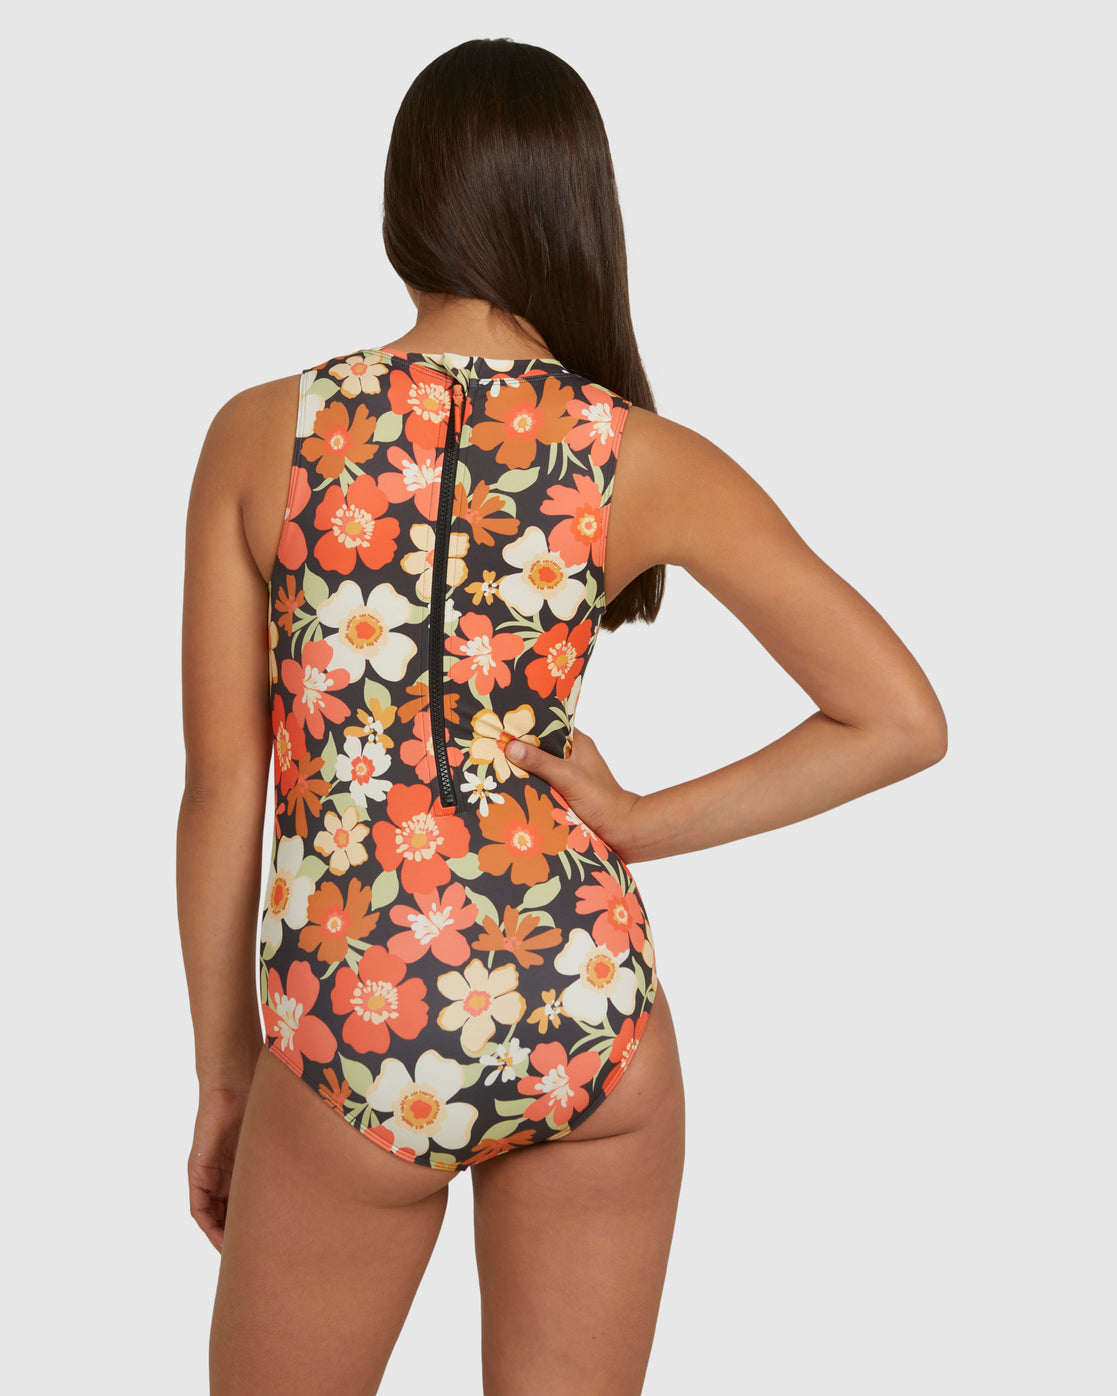 Billabong Cross Step Underwire One-Piece Swimsuit  Urban Outfitters New  Zealand - Clothing, Music, Home & Accessories